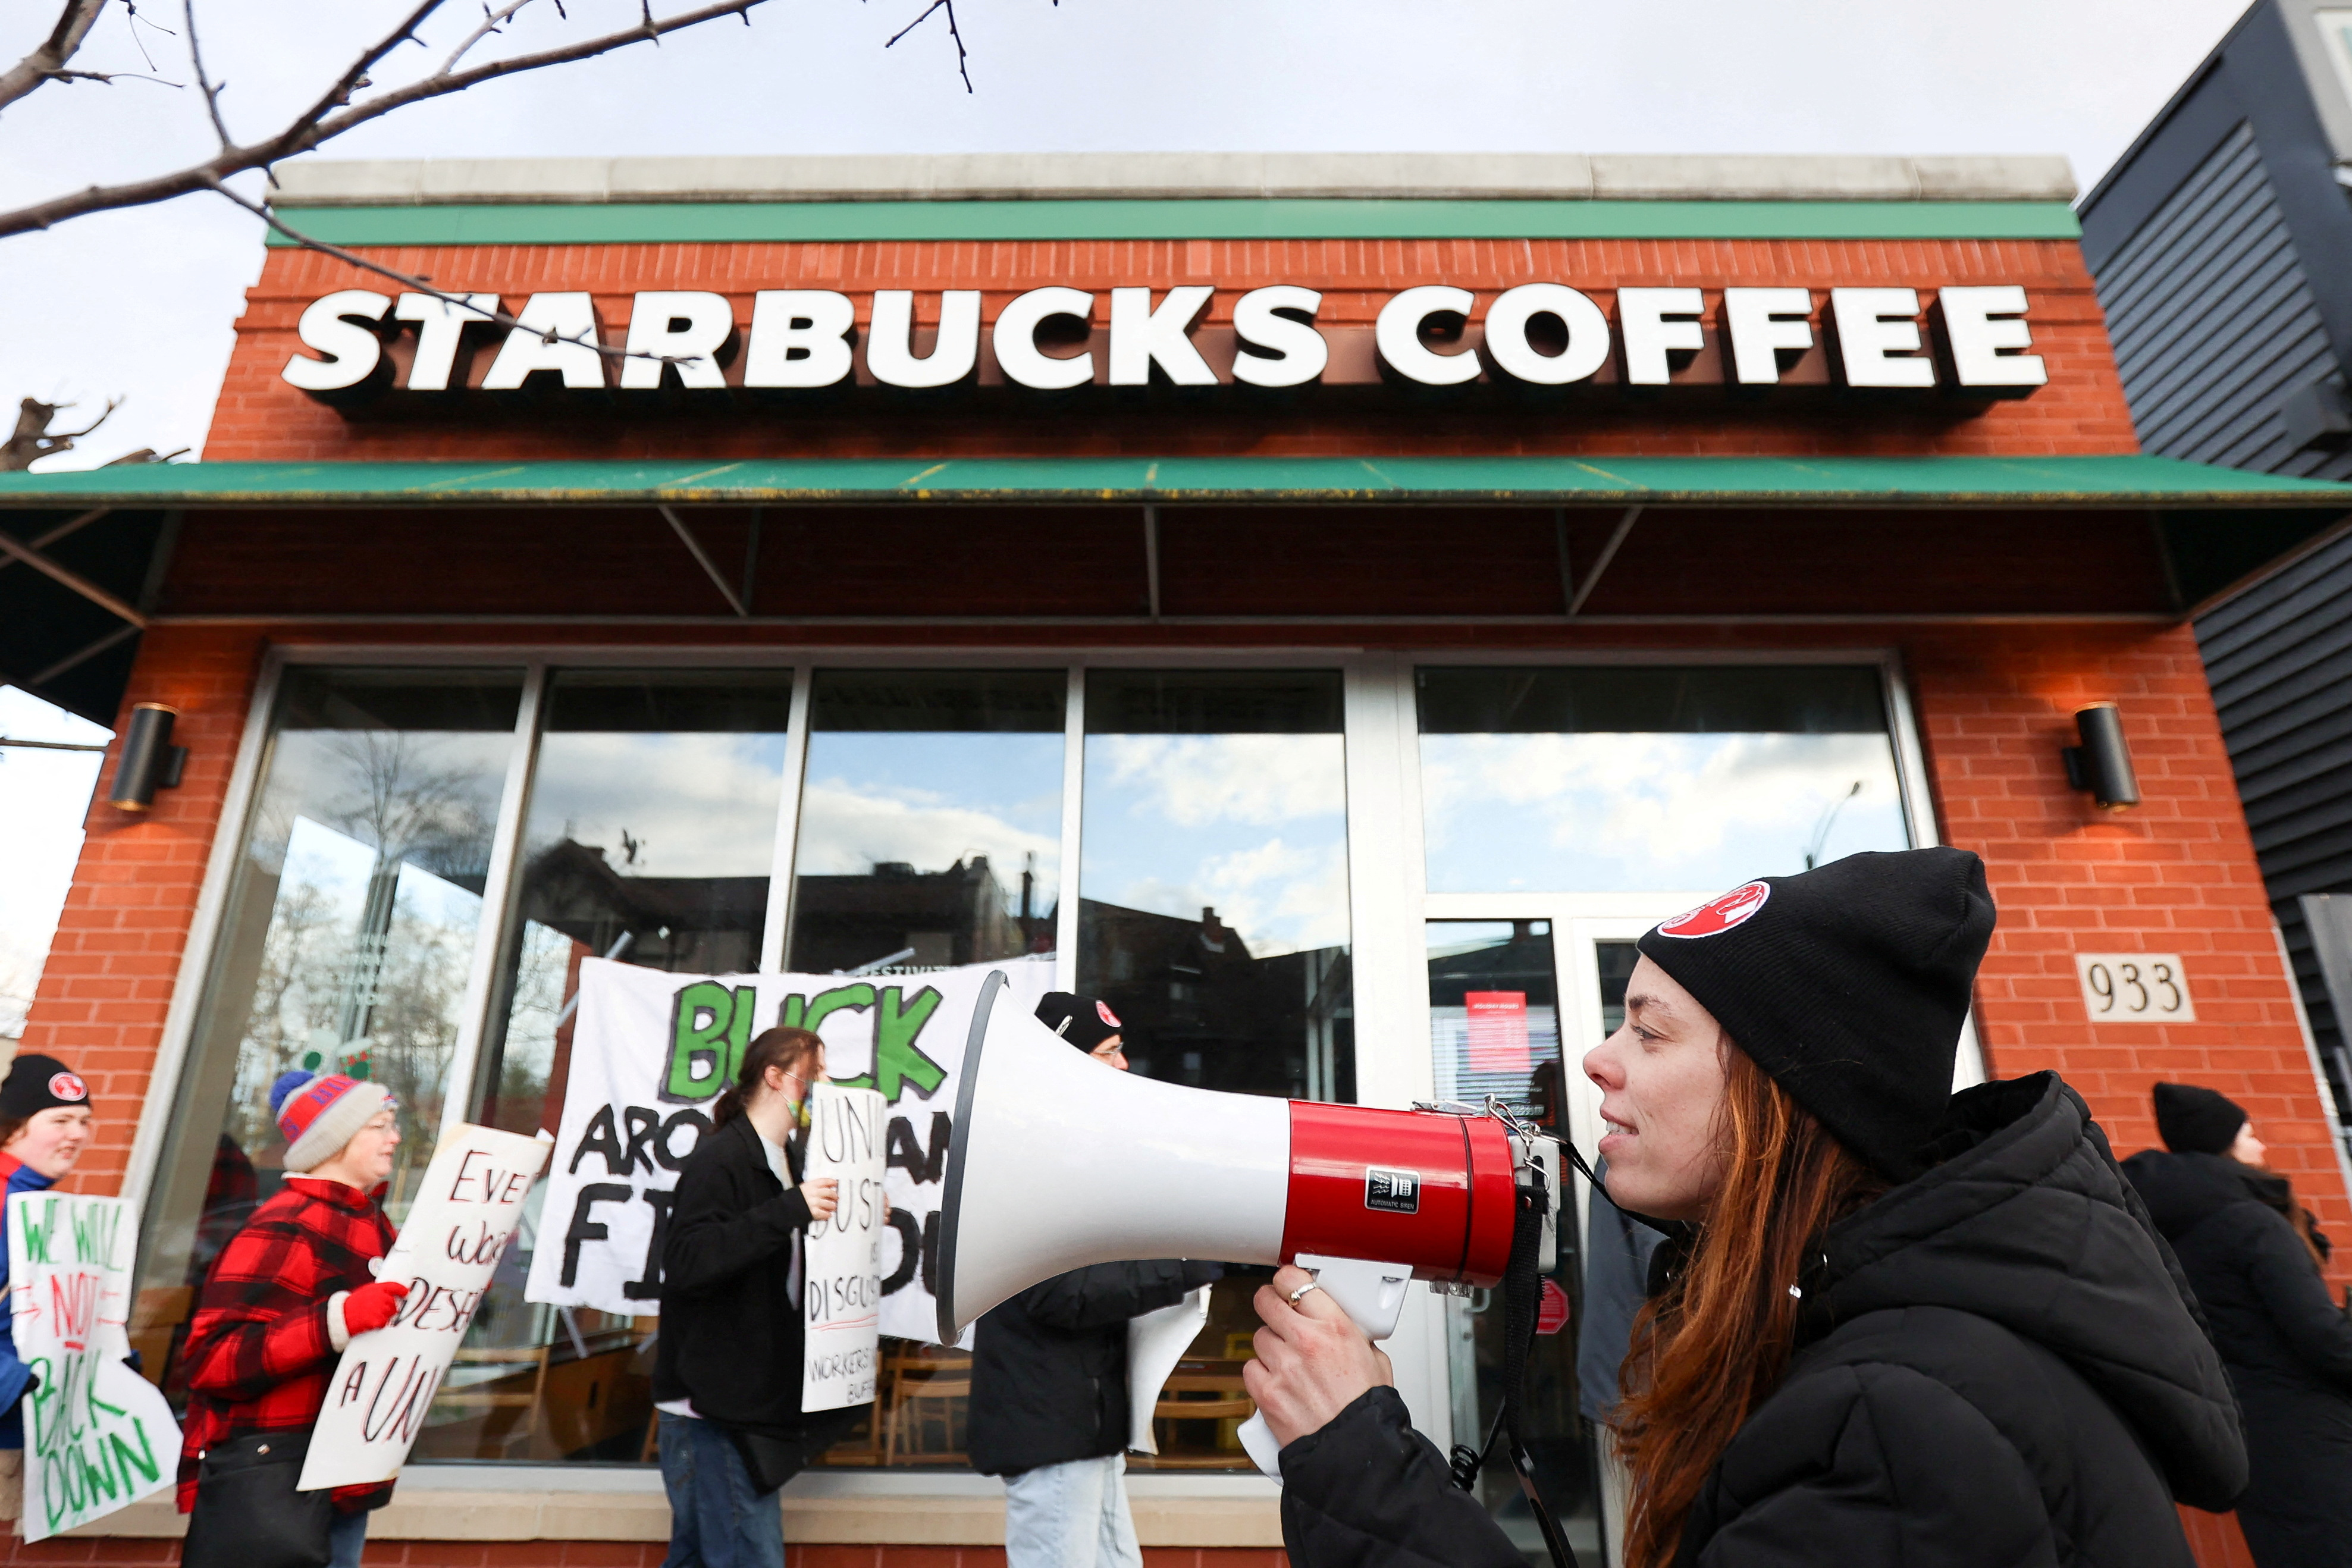 Starbucks U.S. workers at 100 stores hold one-day walkout